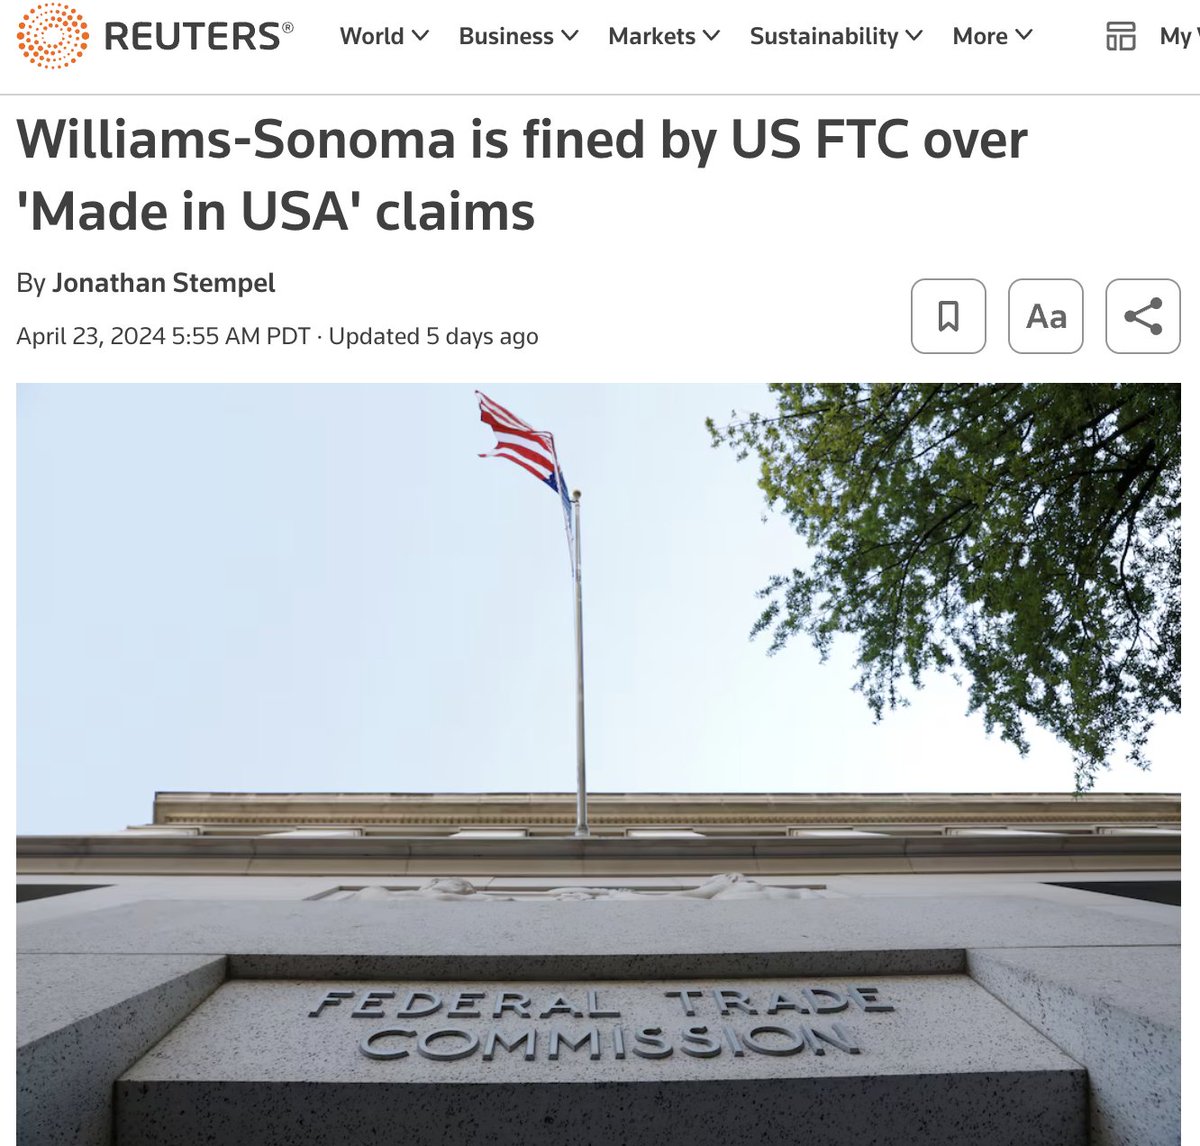 Williams-Sonoma claimed that products were 'crafted in America from domestic and imported materials' when in fact they were wholly imported from China. They previously got fined for the same thing in 2020.